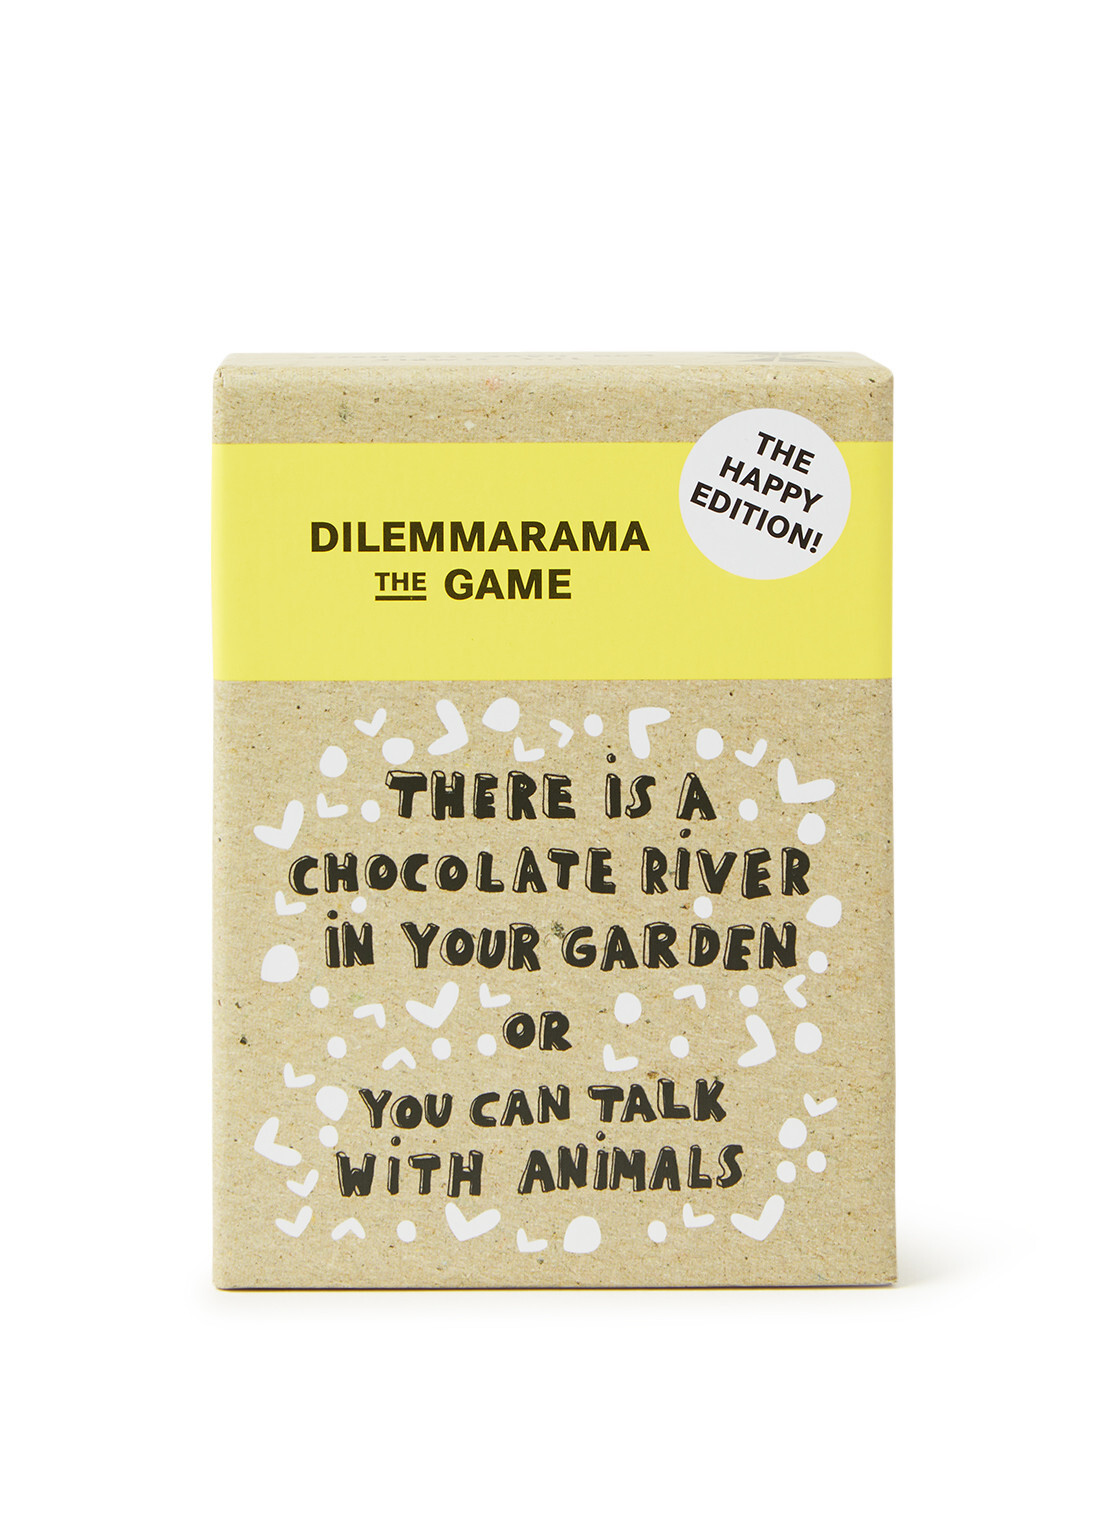 BIS Publishers Dilemmarama the Game - Happy Edition